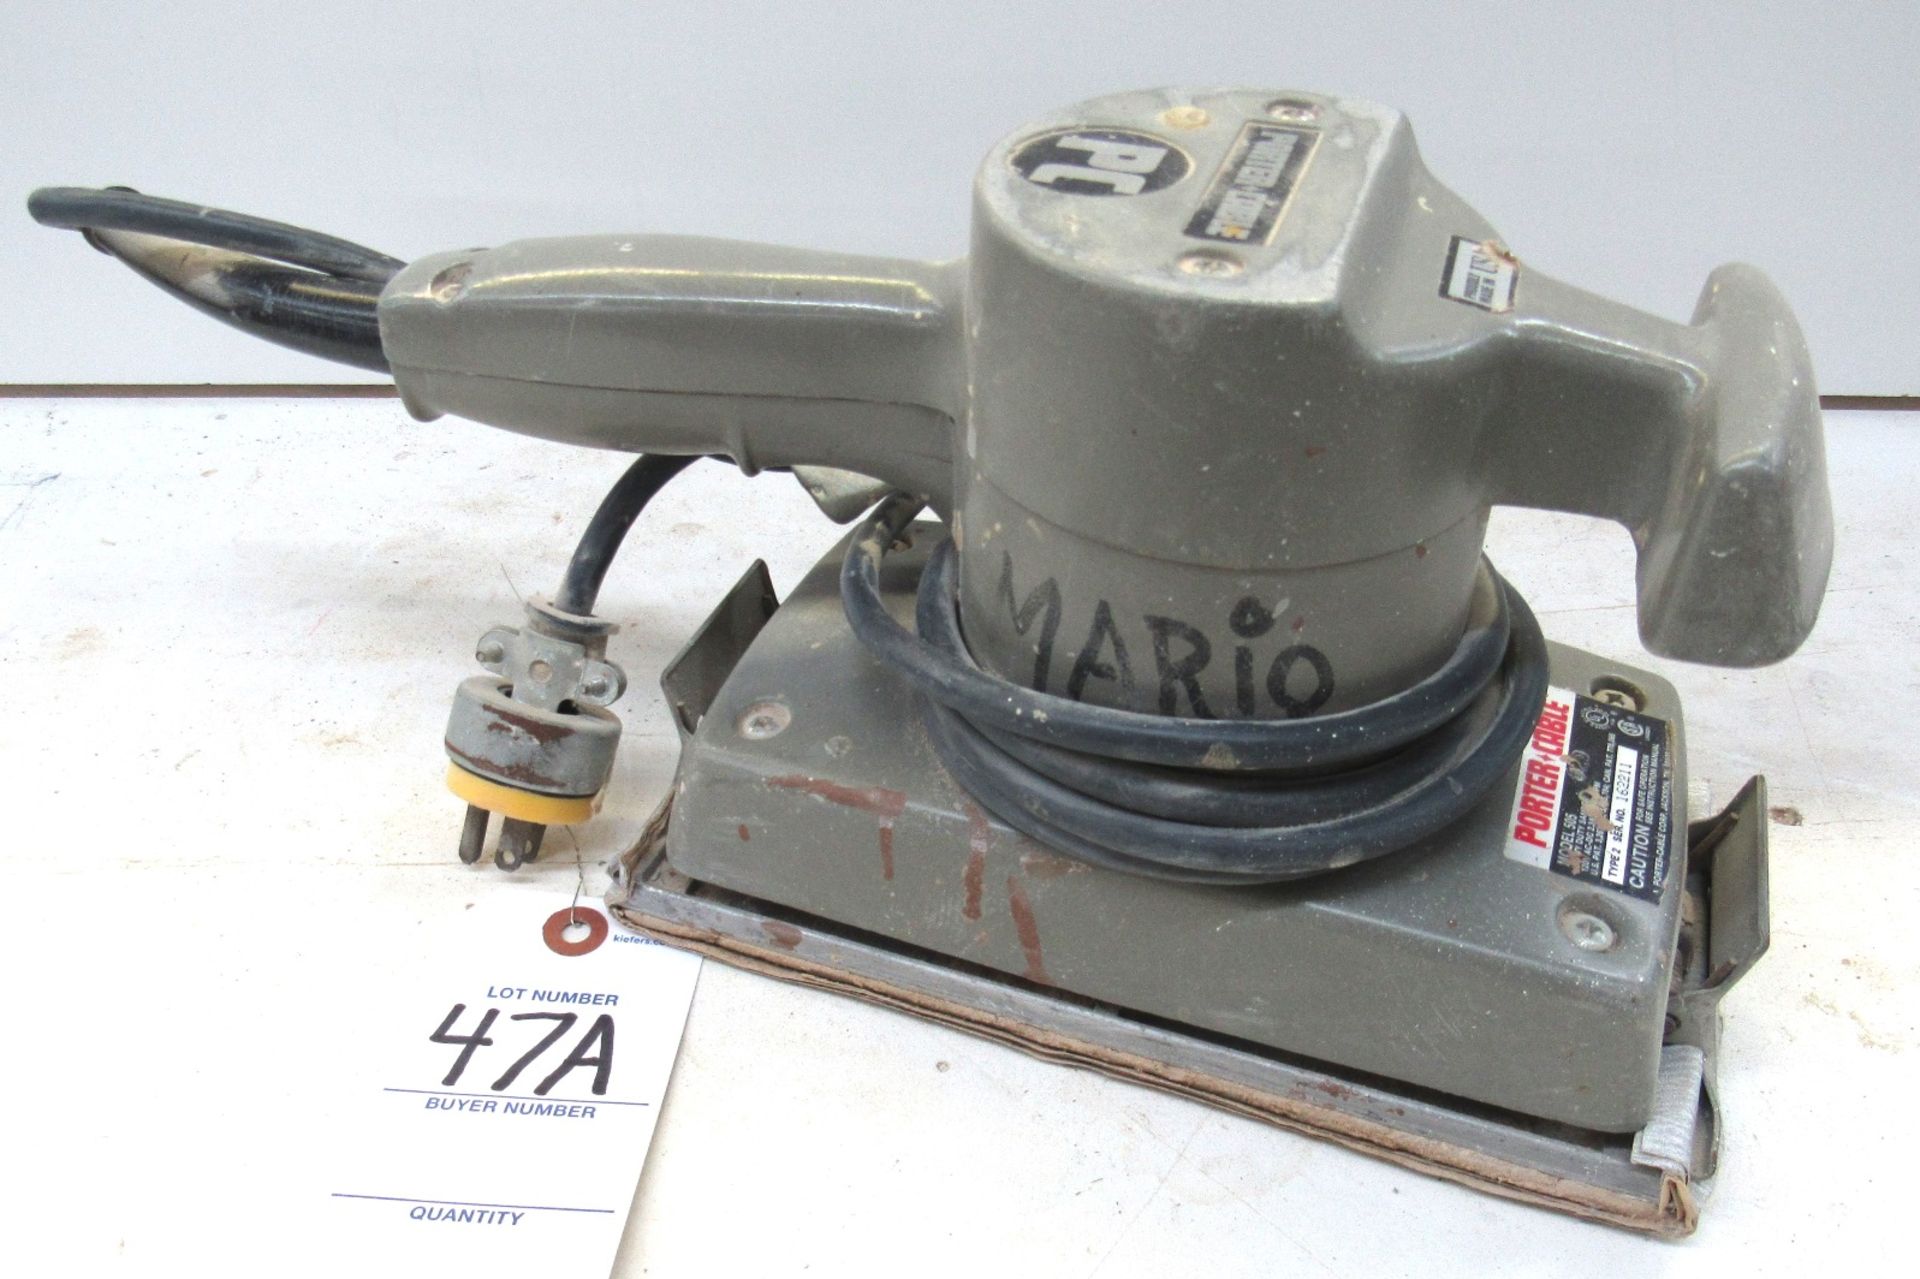 (2) Porter-Cable Mod.505 1/2" Heavy Duty Finishing Sander - Image 2 of 2